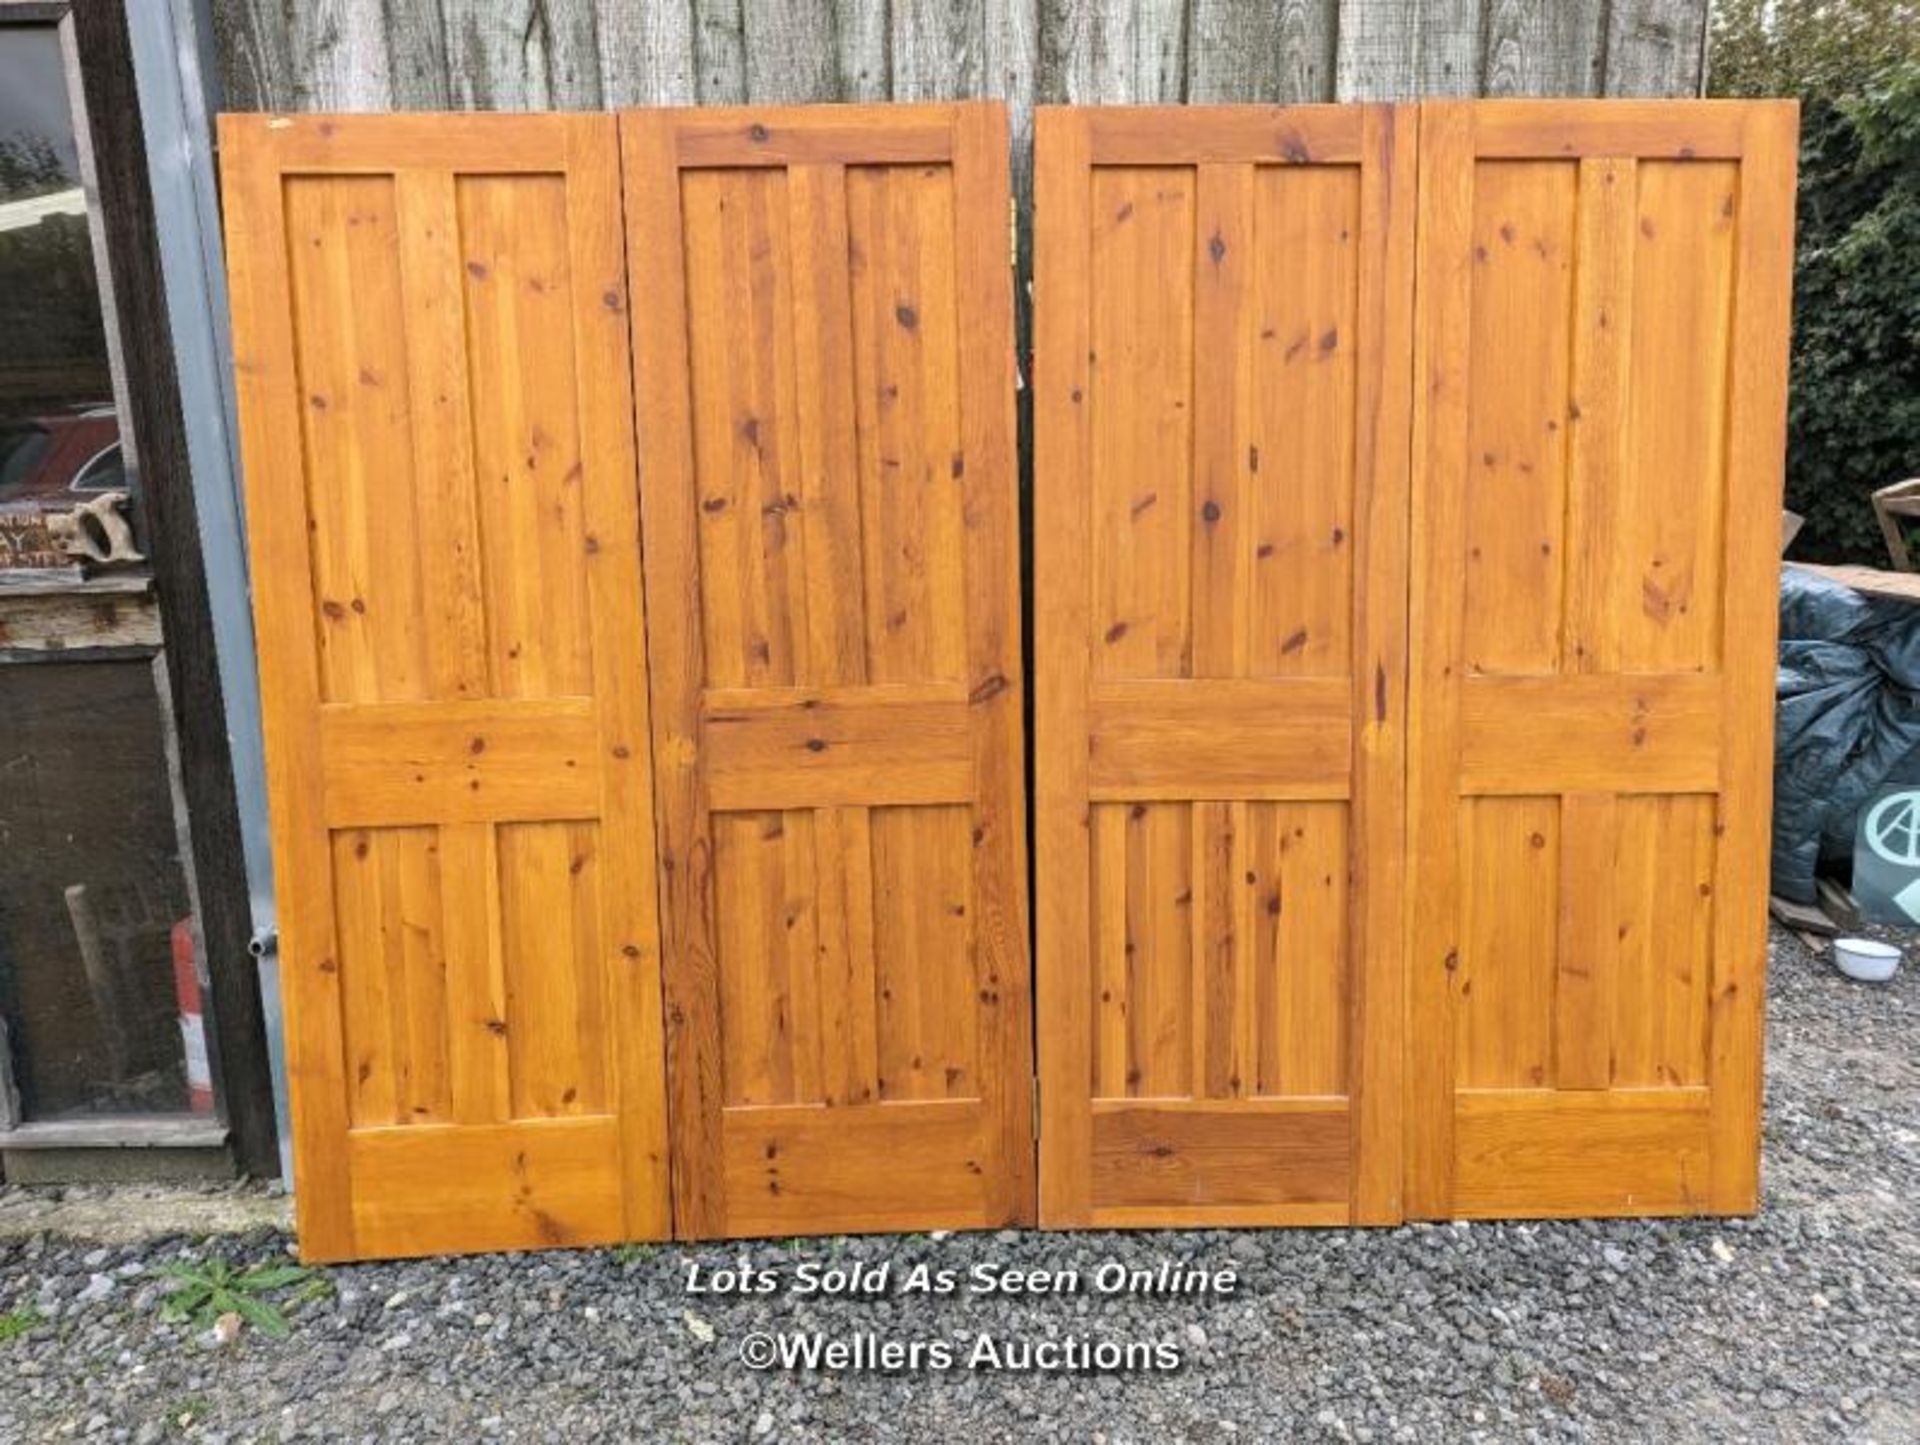 4 matching pine four panel doors, morticed and tenoned construction. Each door 61cm x 183cm x 4cm.